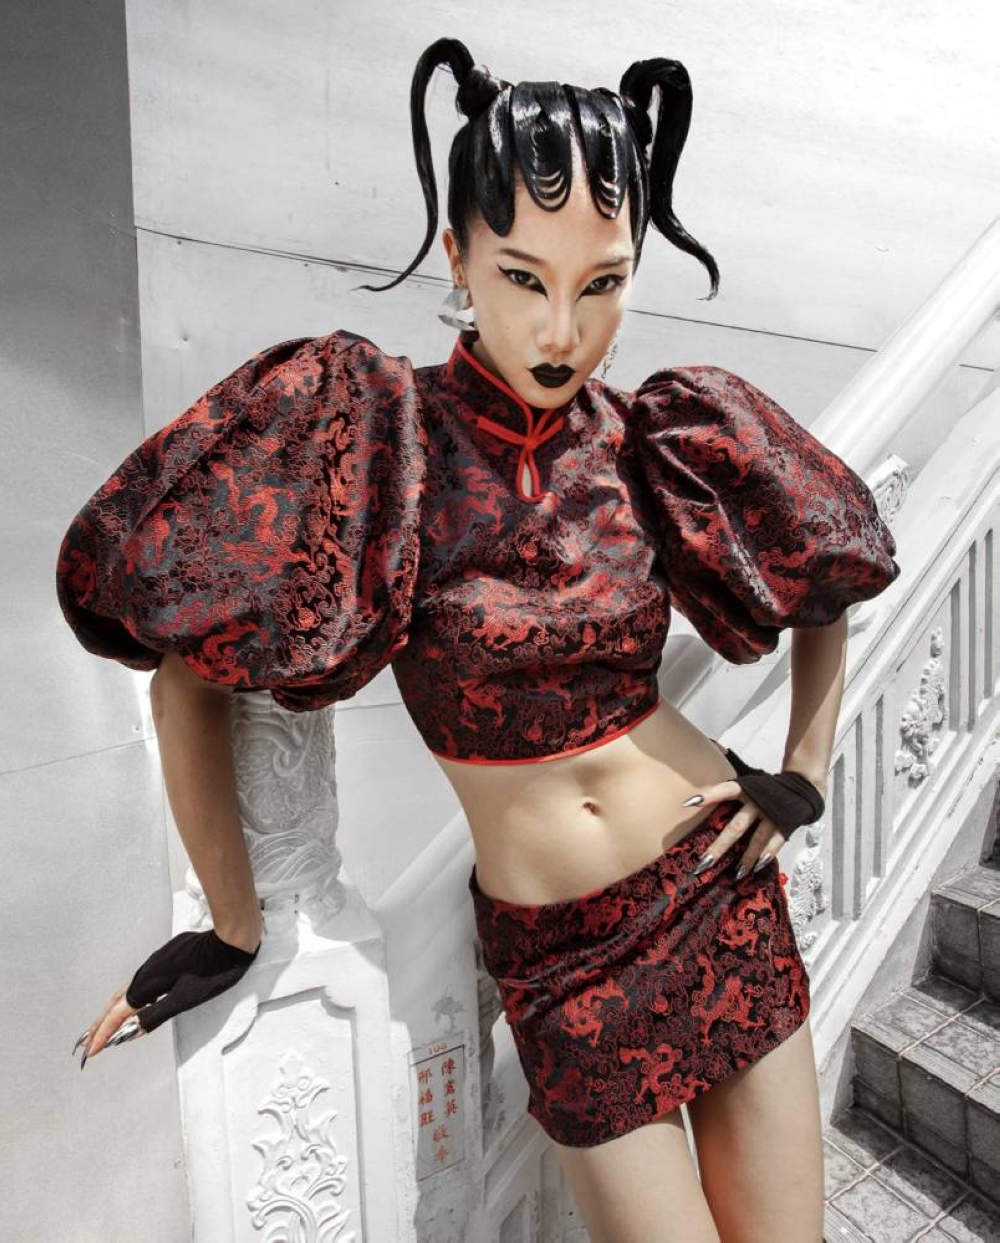 From Behati, an alluring qipao dragon top with puff sleeves and mini skirt.  — Image courtesy of Behati